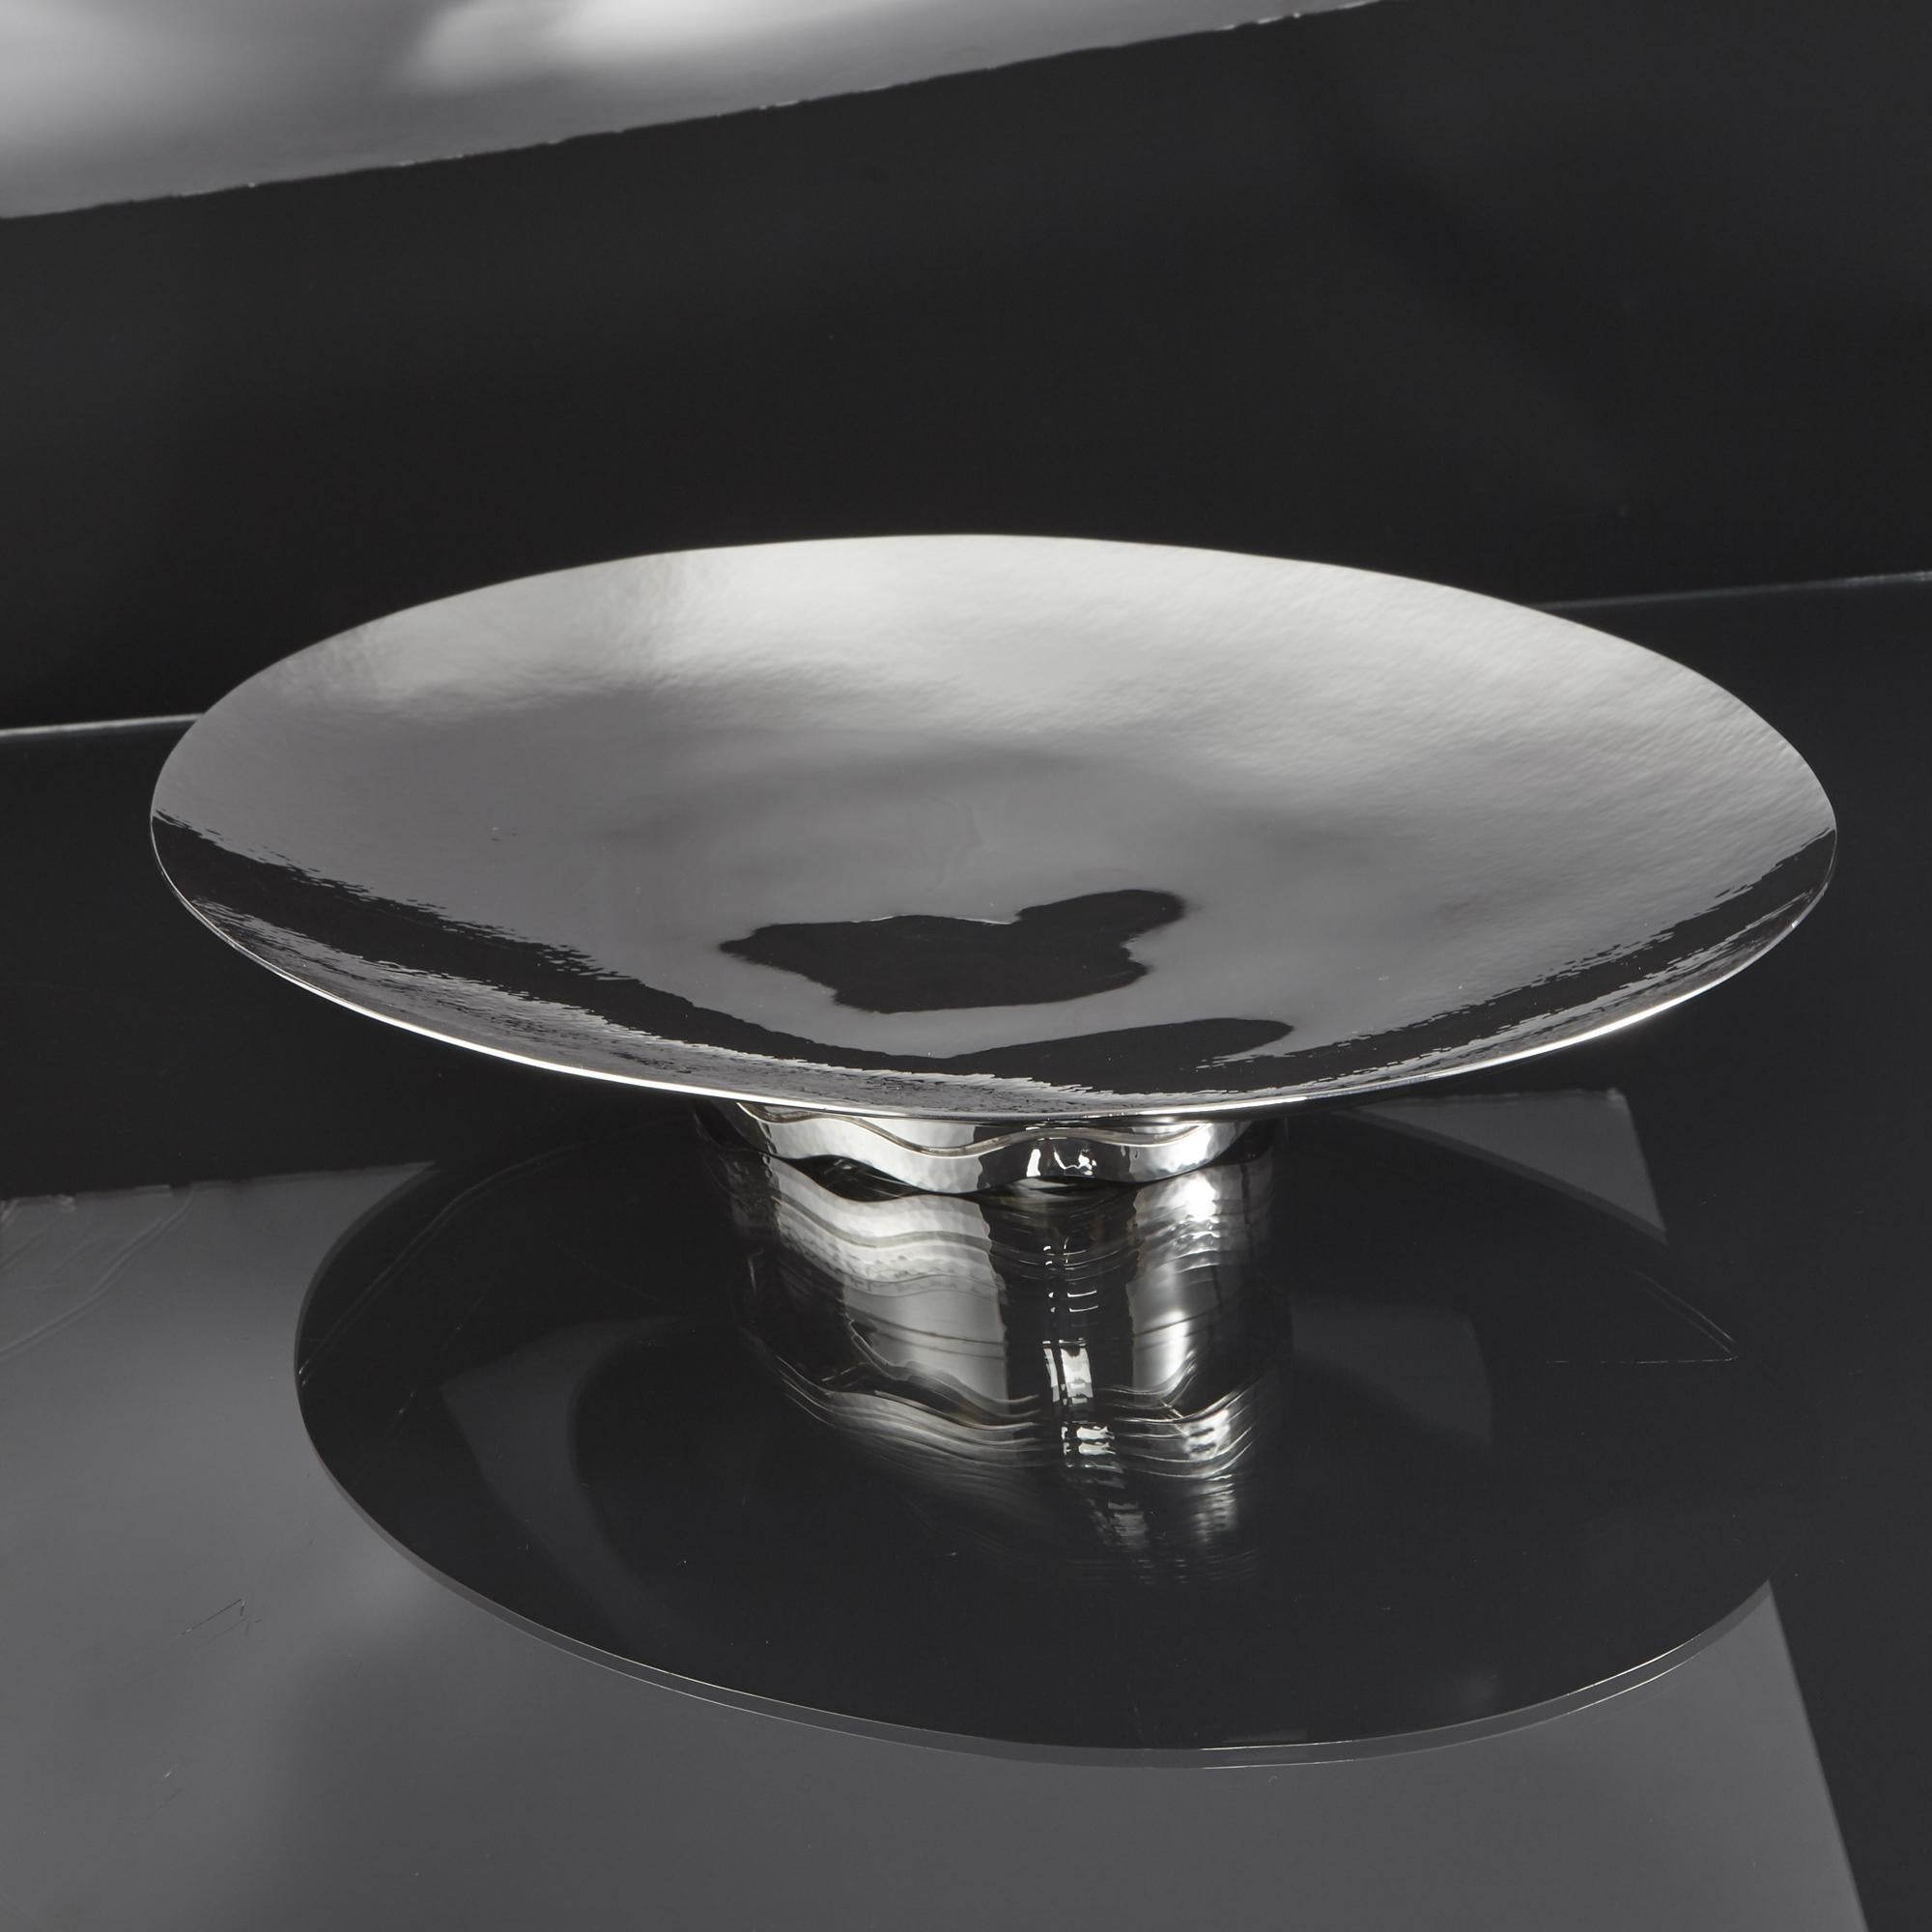 Large and elegant contemporary hammered silver table centrepiece of oval form. The silver dish or shallow bowl is hand hammered around the edge, tapering to a plain central area. The collet base is fitted with a cast, hand-hammered wavy band